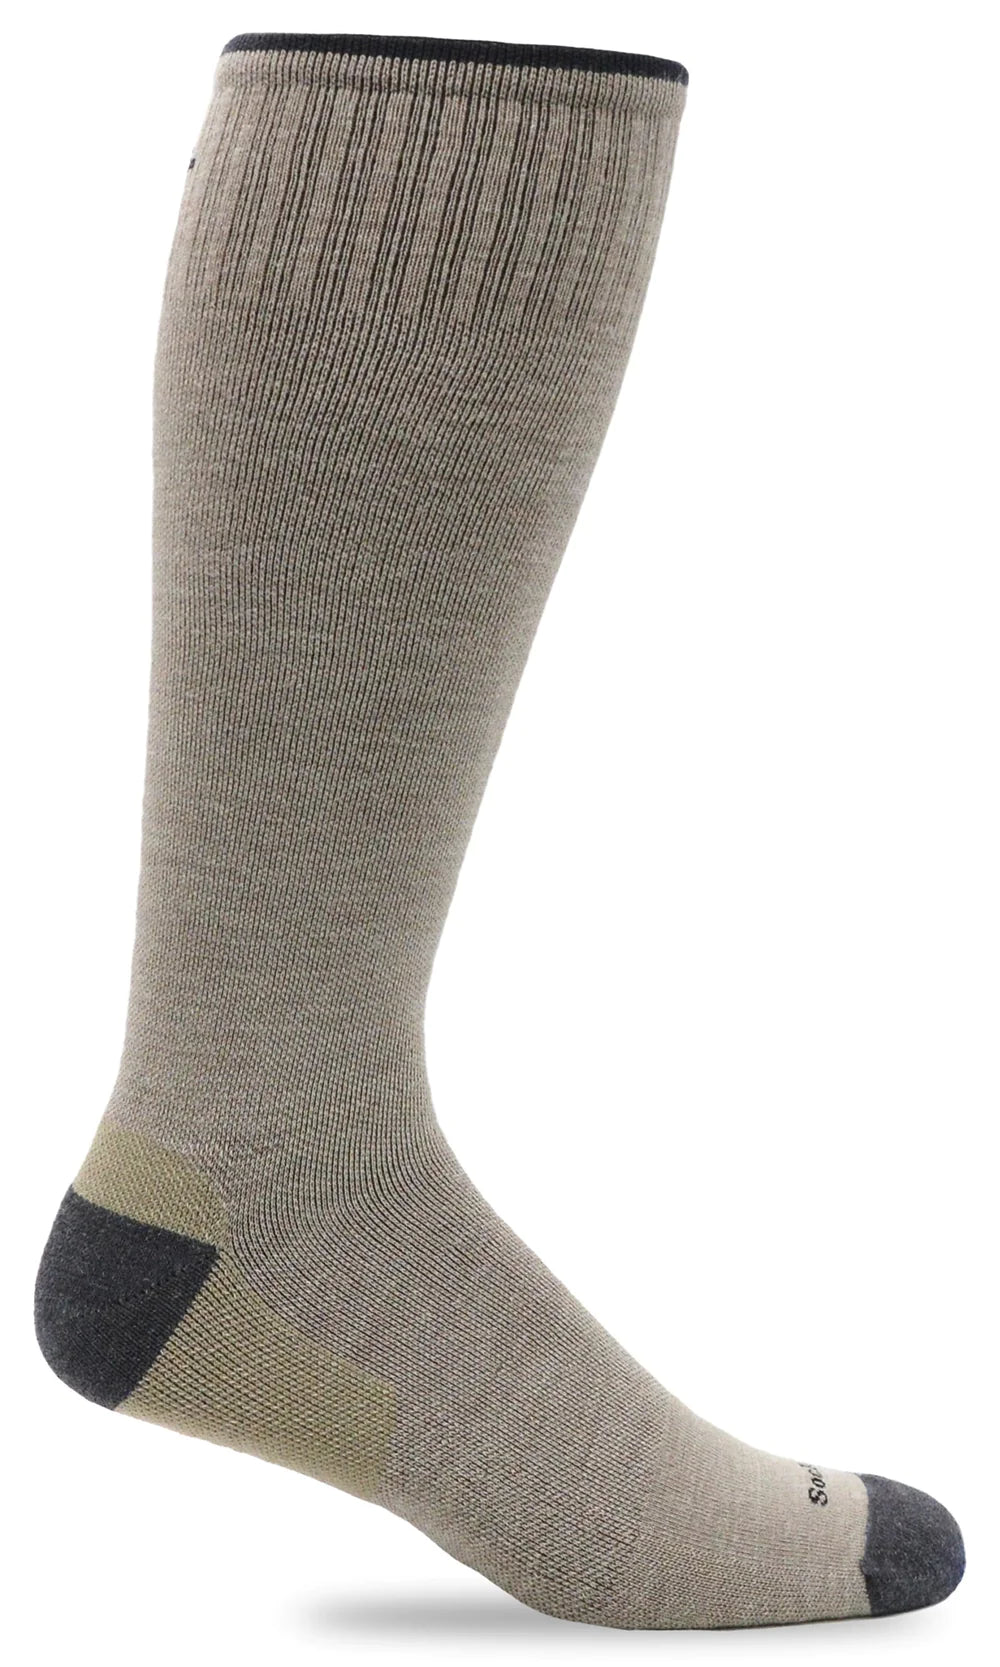 Elevation Men's Bamboo/Merino Firm Compression Socks in Putty - Size L/XL